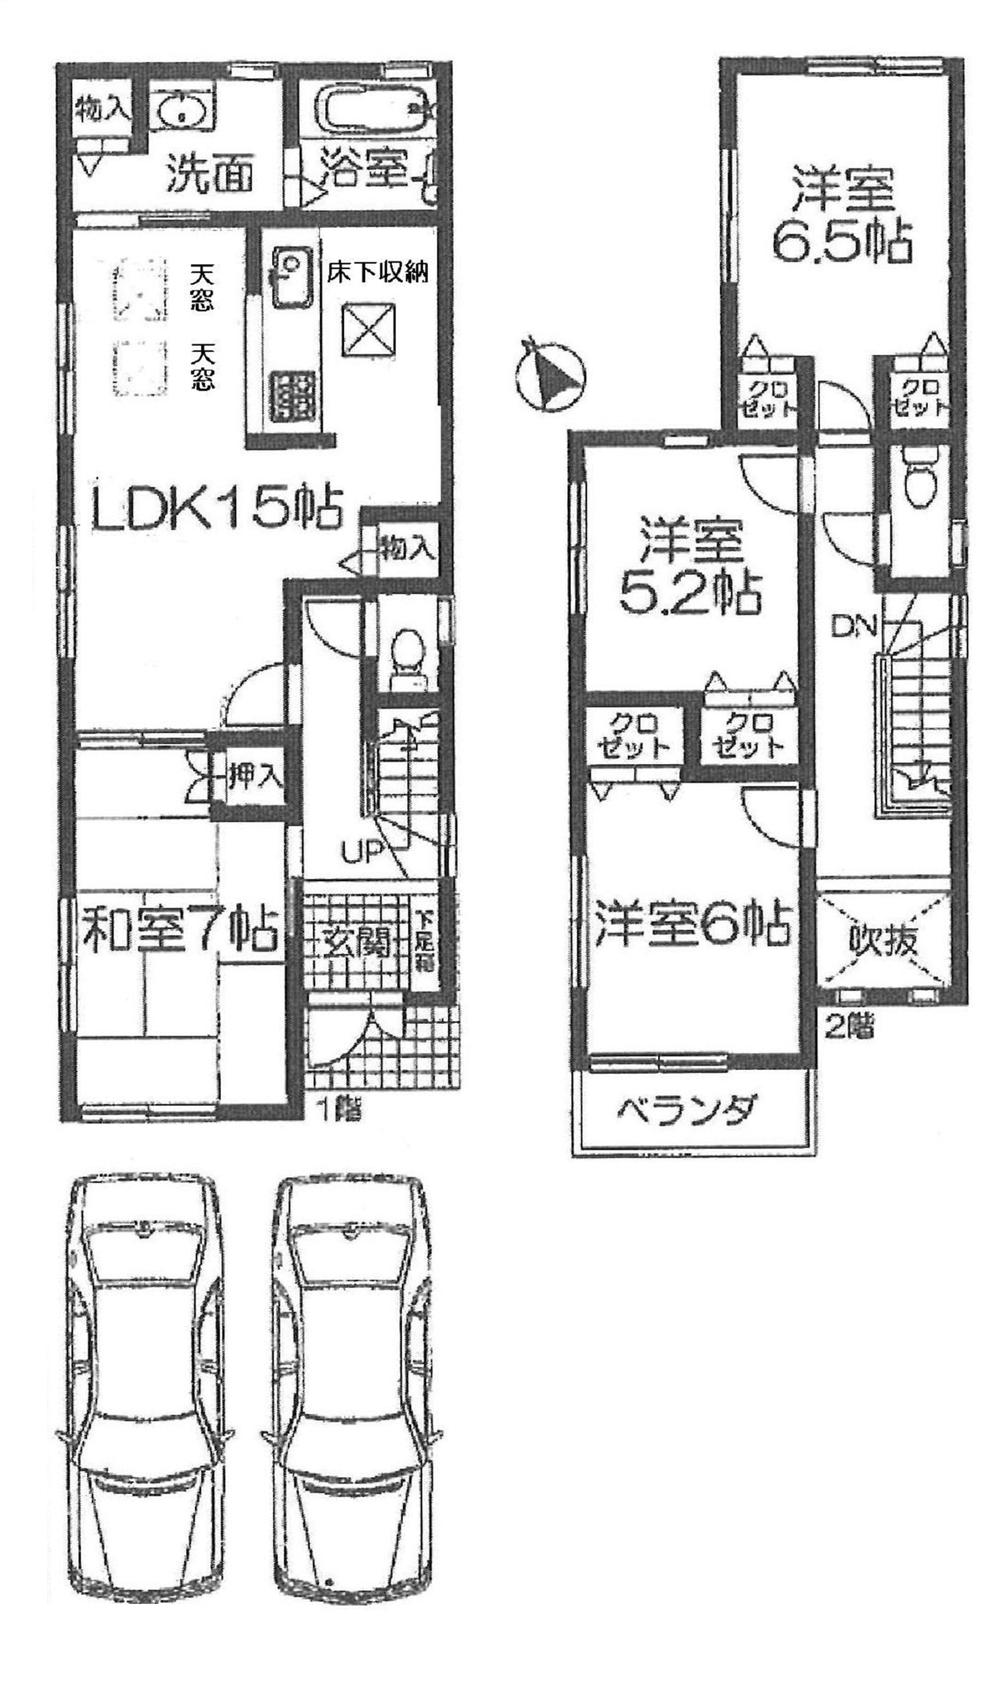 Floor plan. 21,800,000 yen, 4LDK, Land area 106.35 sq m , Used Detached of 4LDK with a focus on LDK of building area 96.79 sq m 15 Pledge Because there is accommodated in each room, It can be widely used rooms. By all rooms dihedral daylighting, Also good per sun.